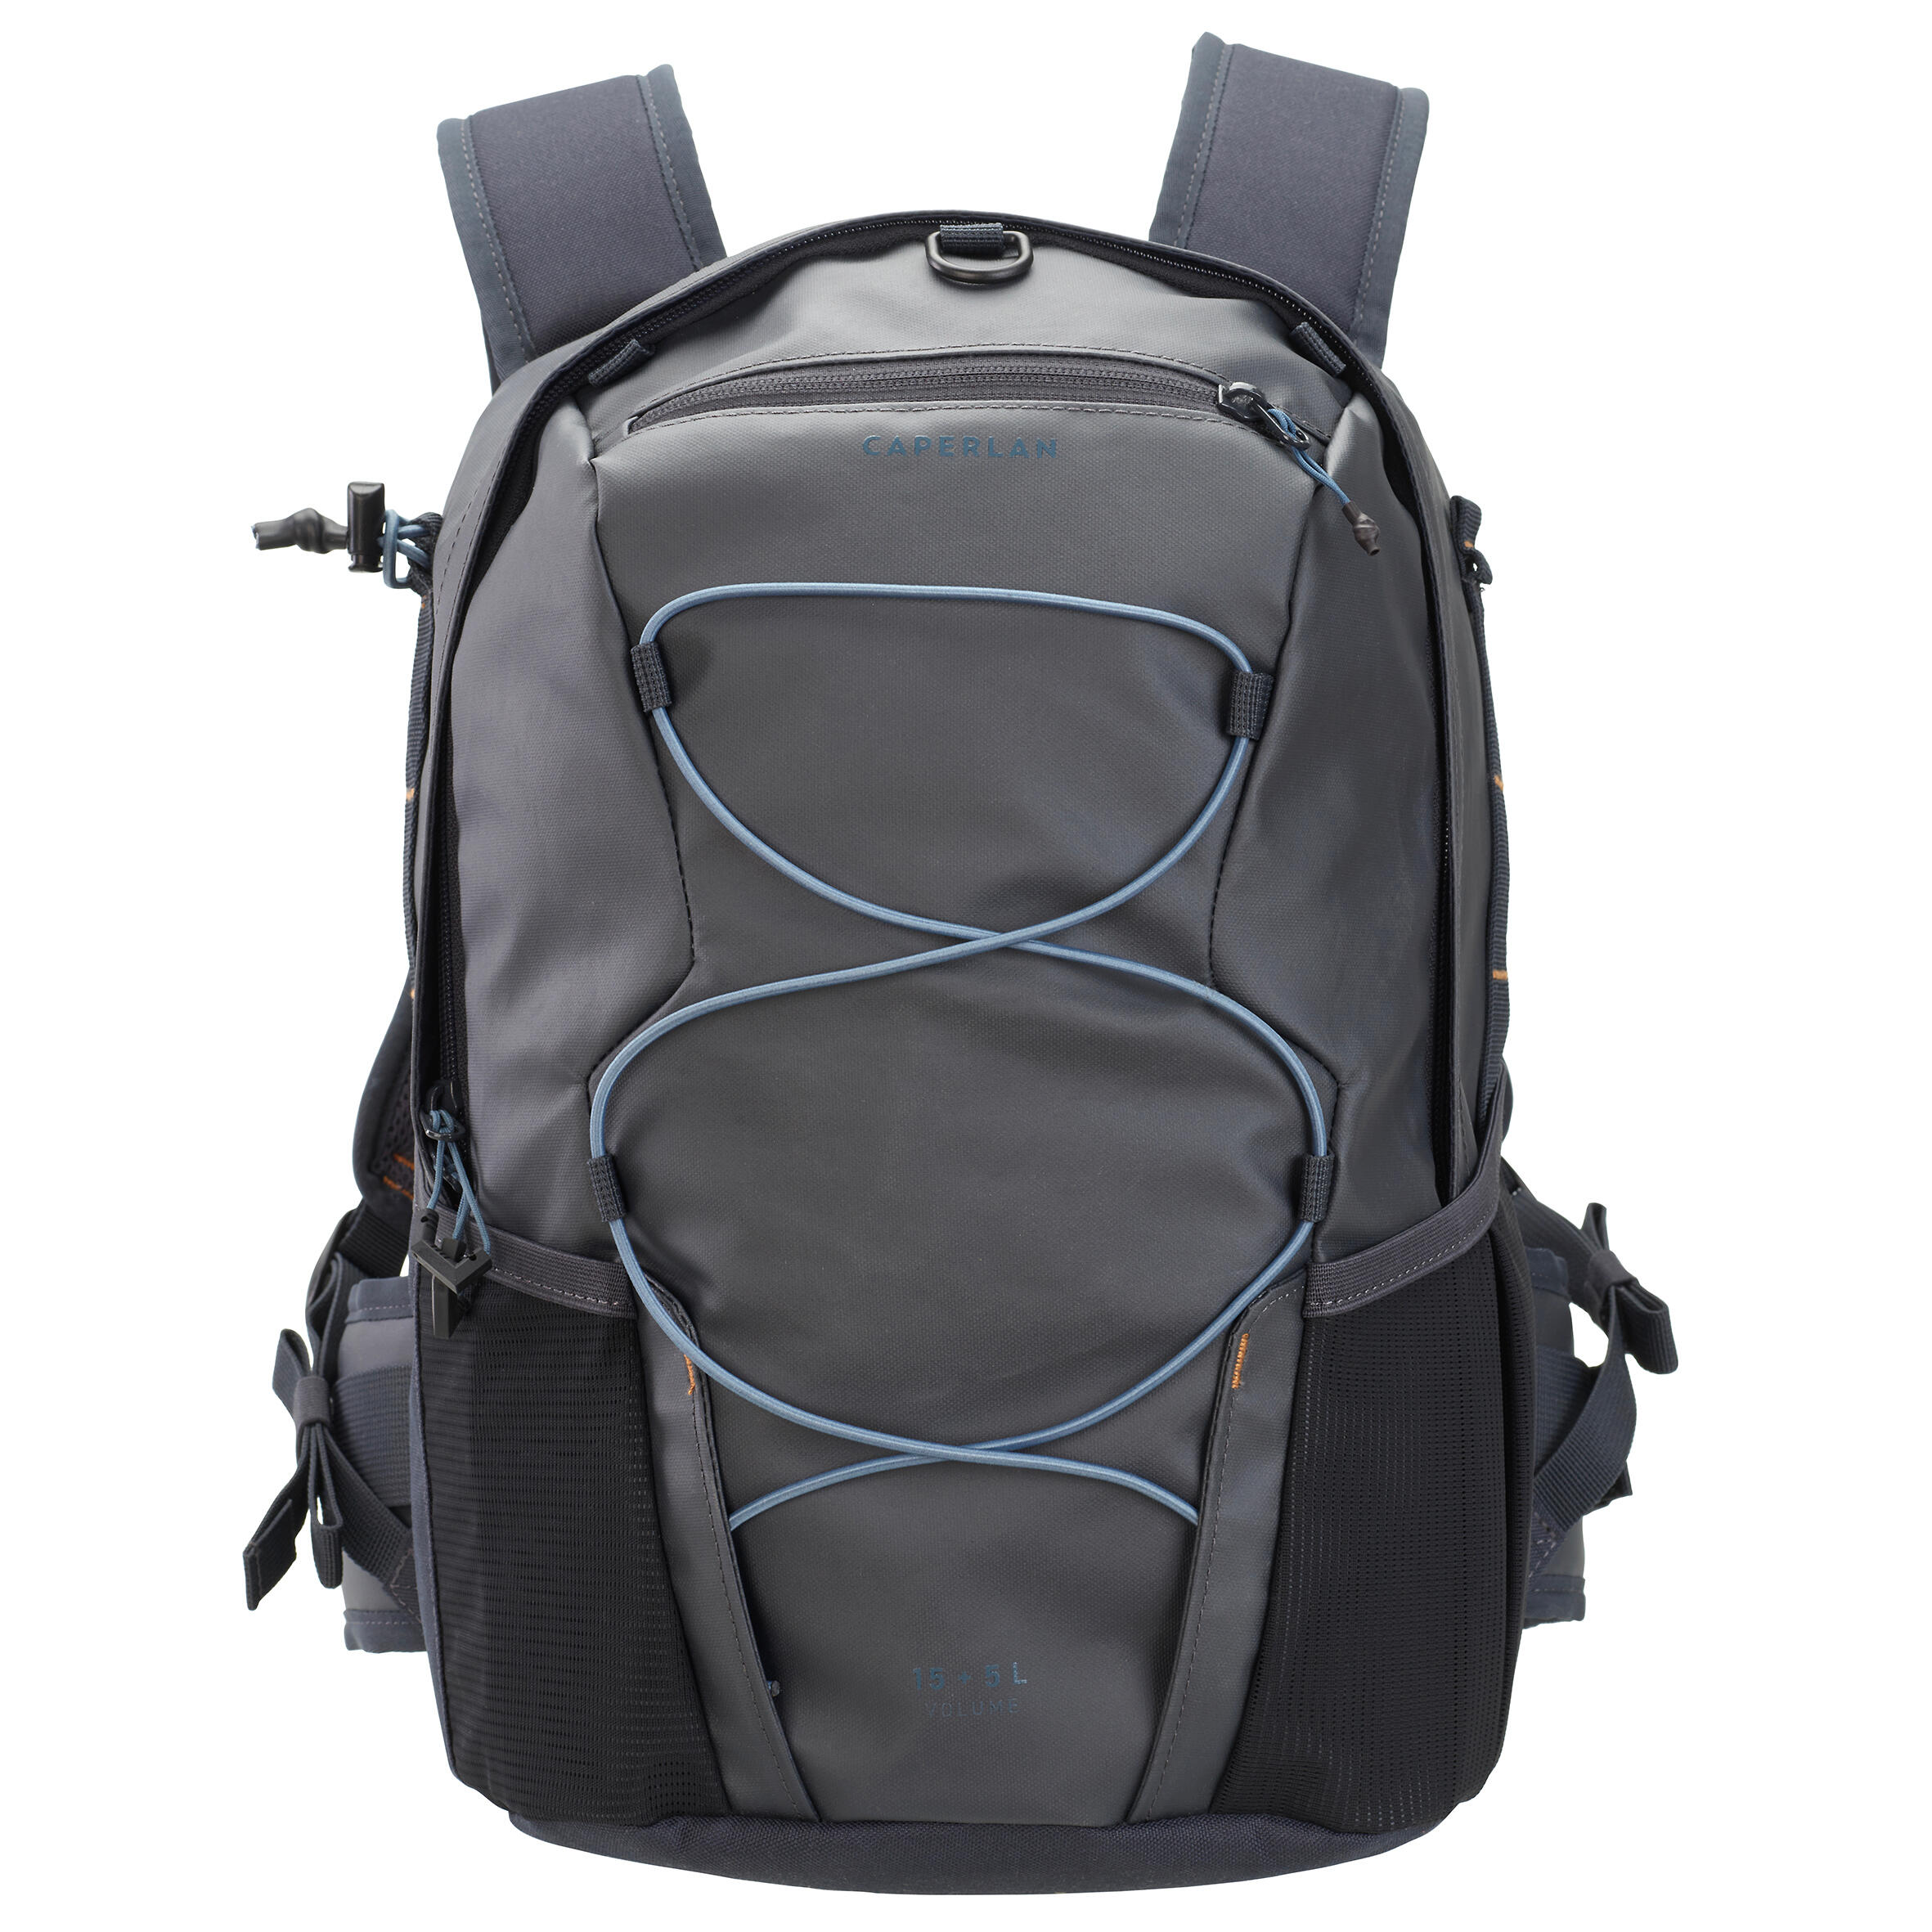 500 fishing backpack and chest pack - CAPERLAN